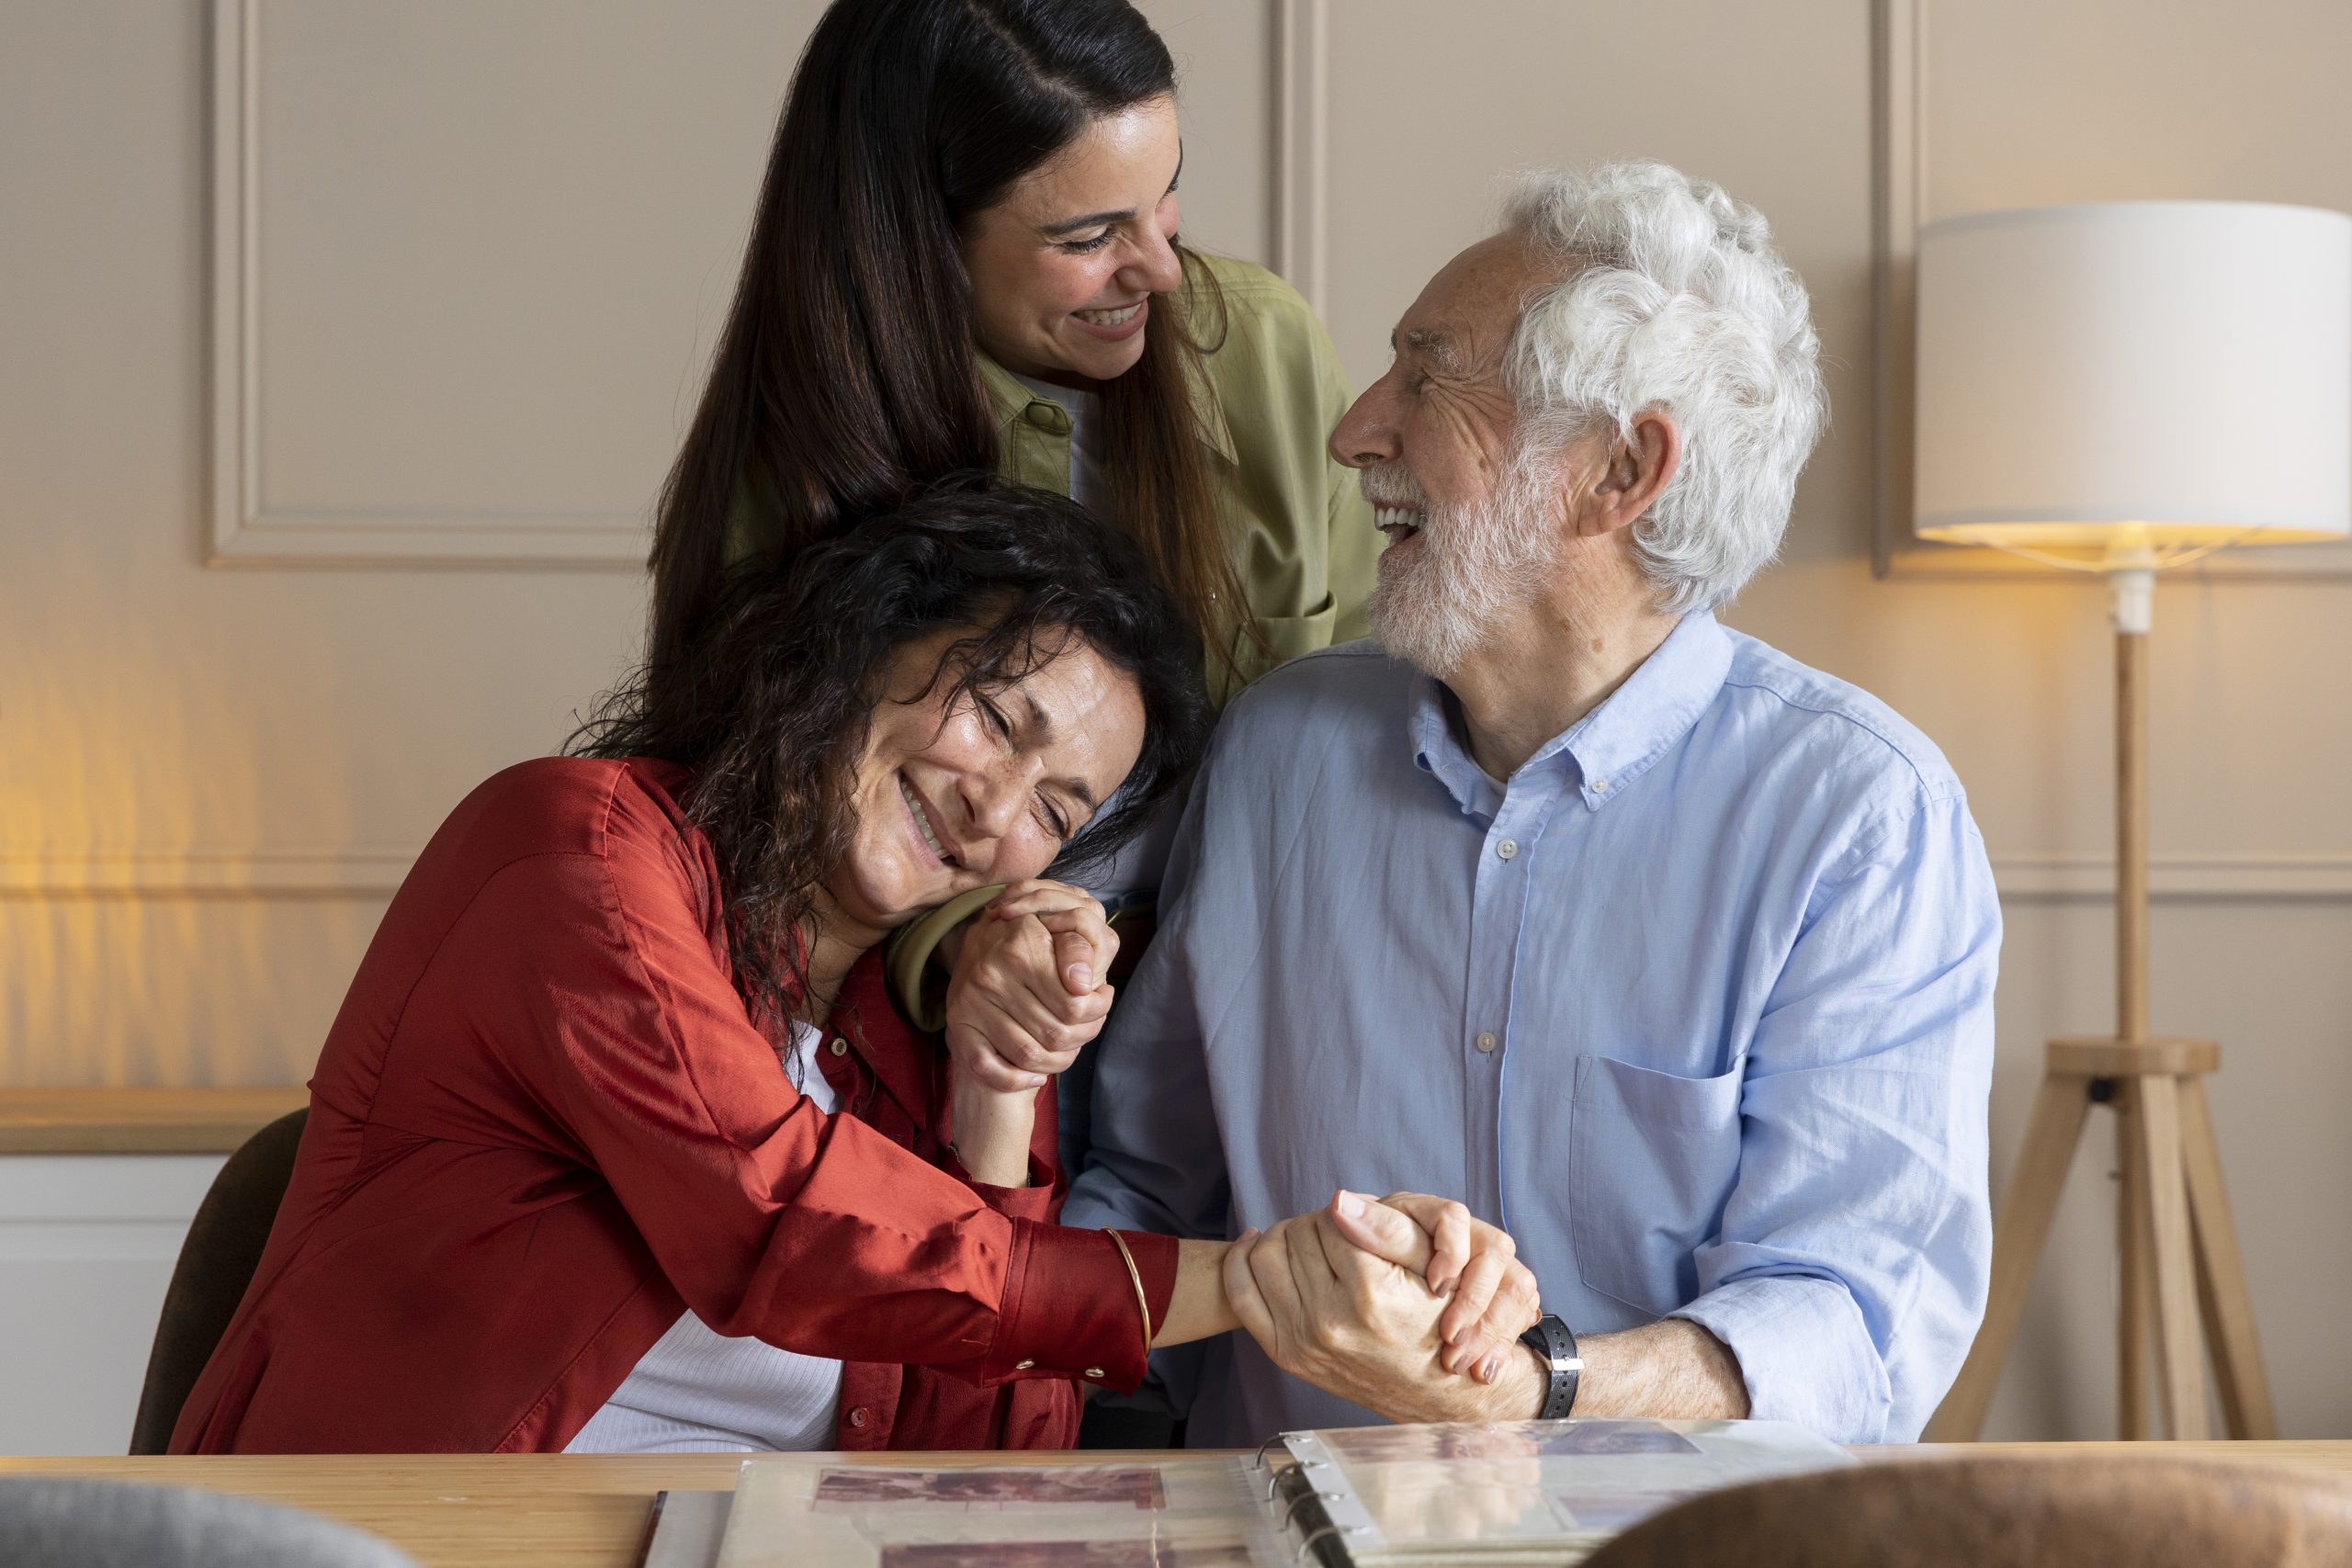 9 Types of Issues to Address When Helping Older Parents